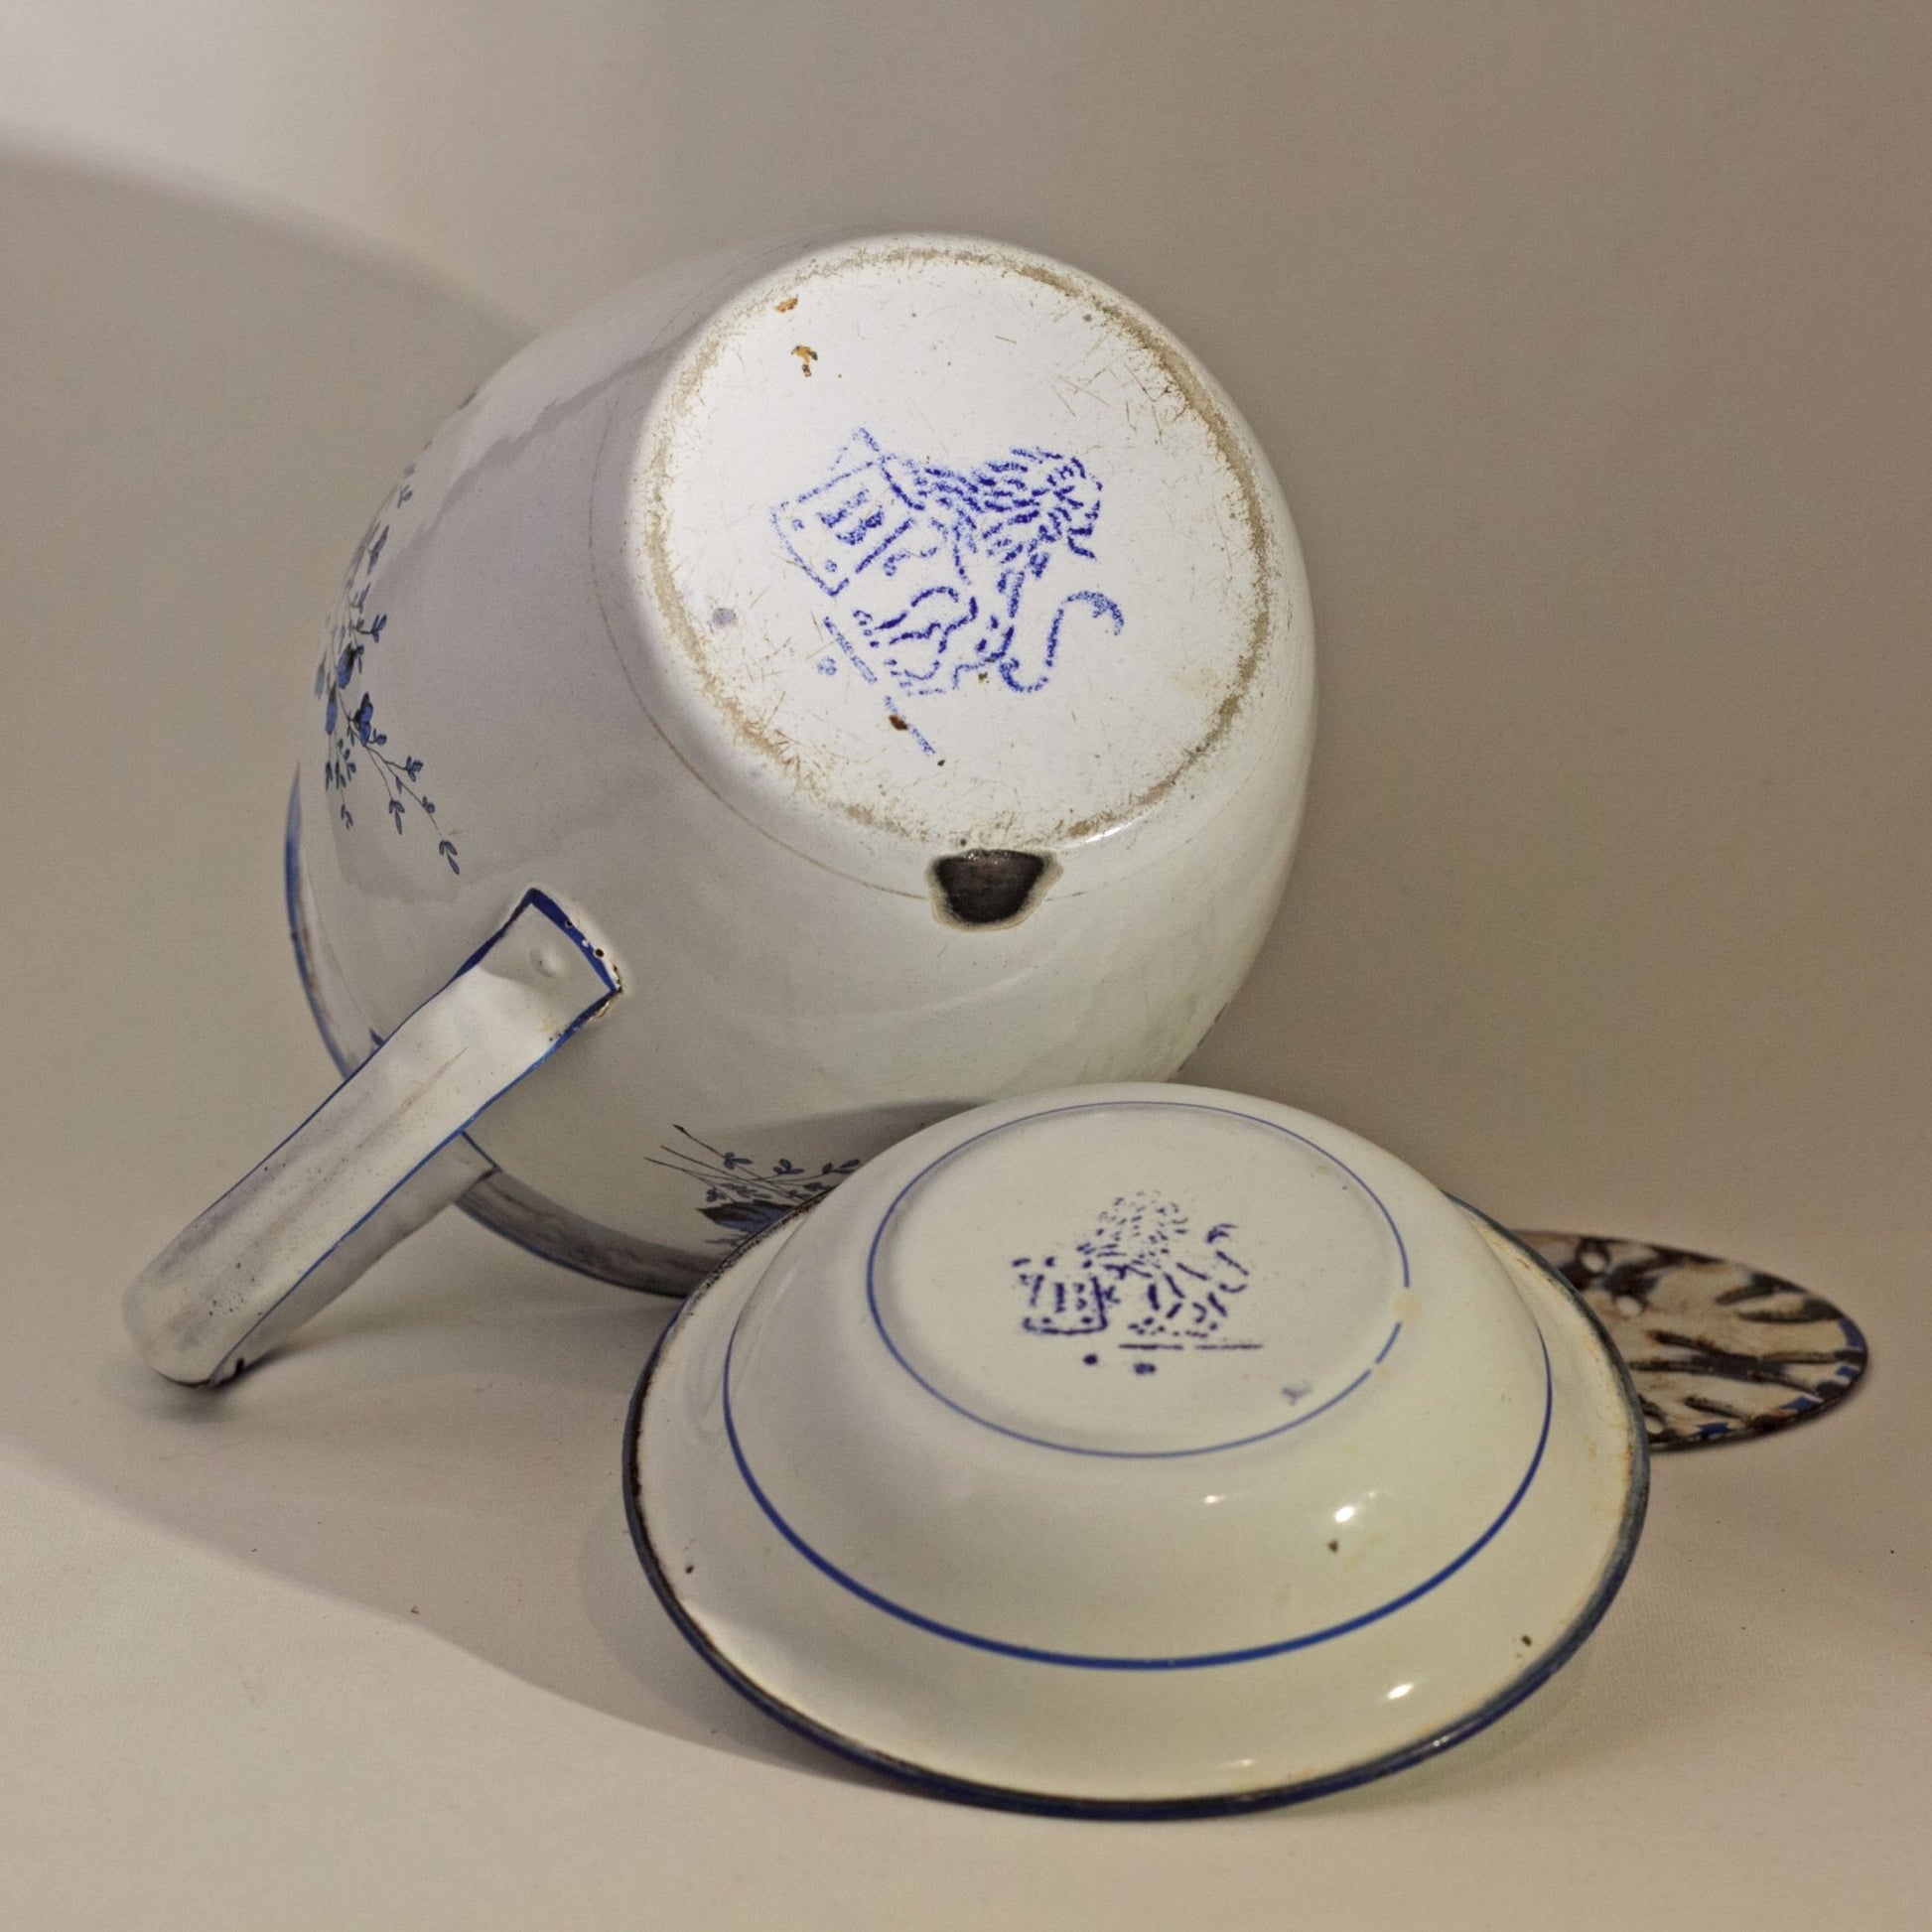 ENAMEL WARE DECORATED BOWL AND PITCHER SET by Gebrüder Baumann Circa 1885 Marked with Rampant Lion Holding Tankard with B